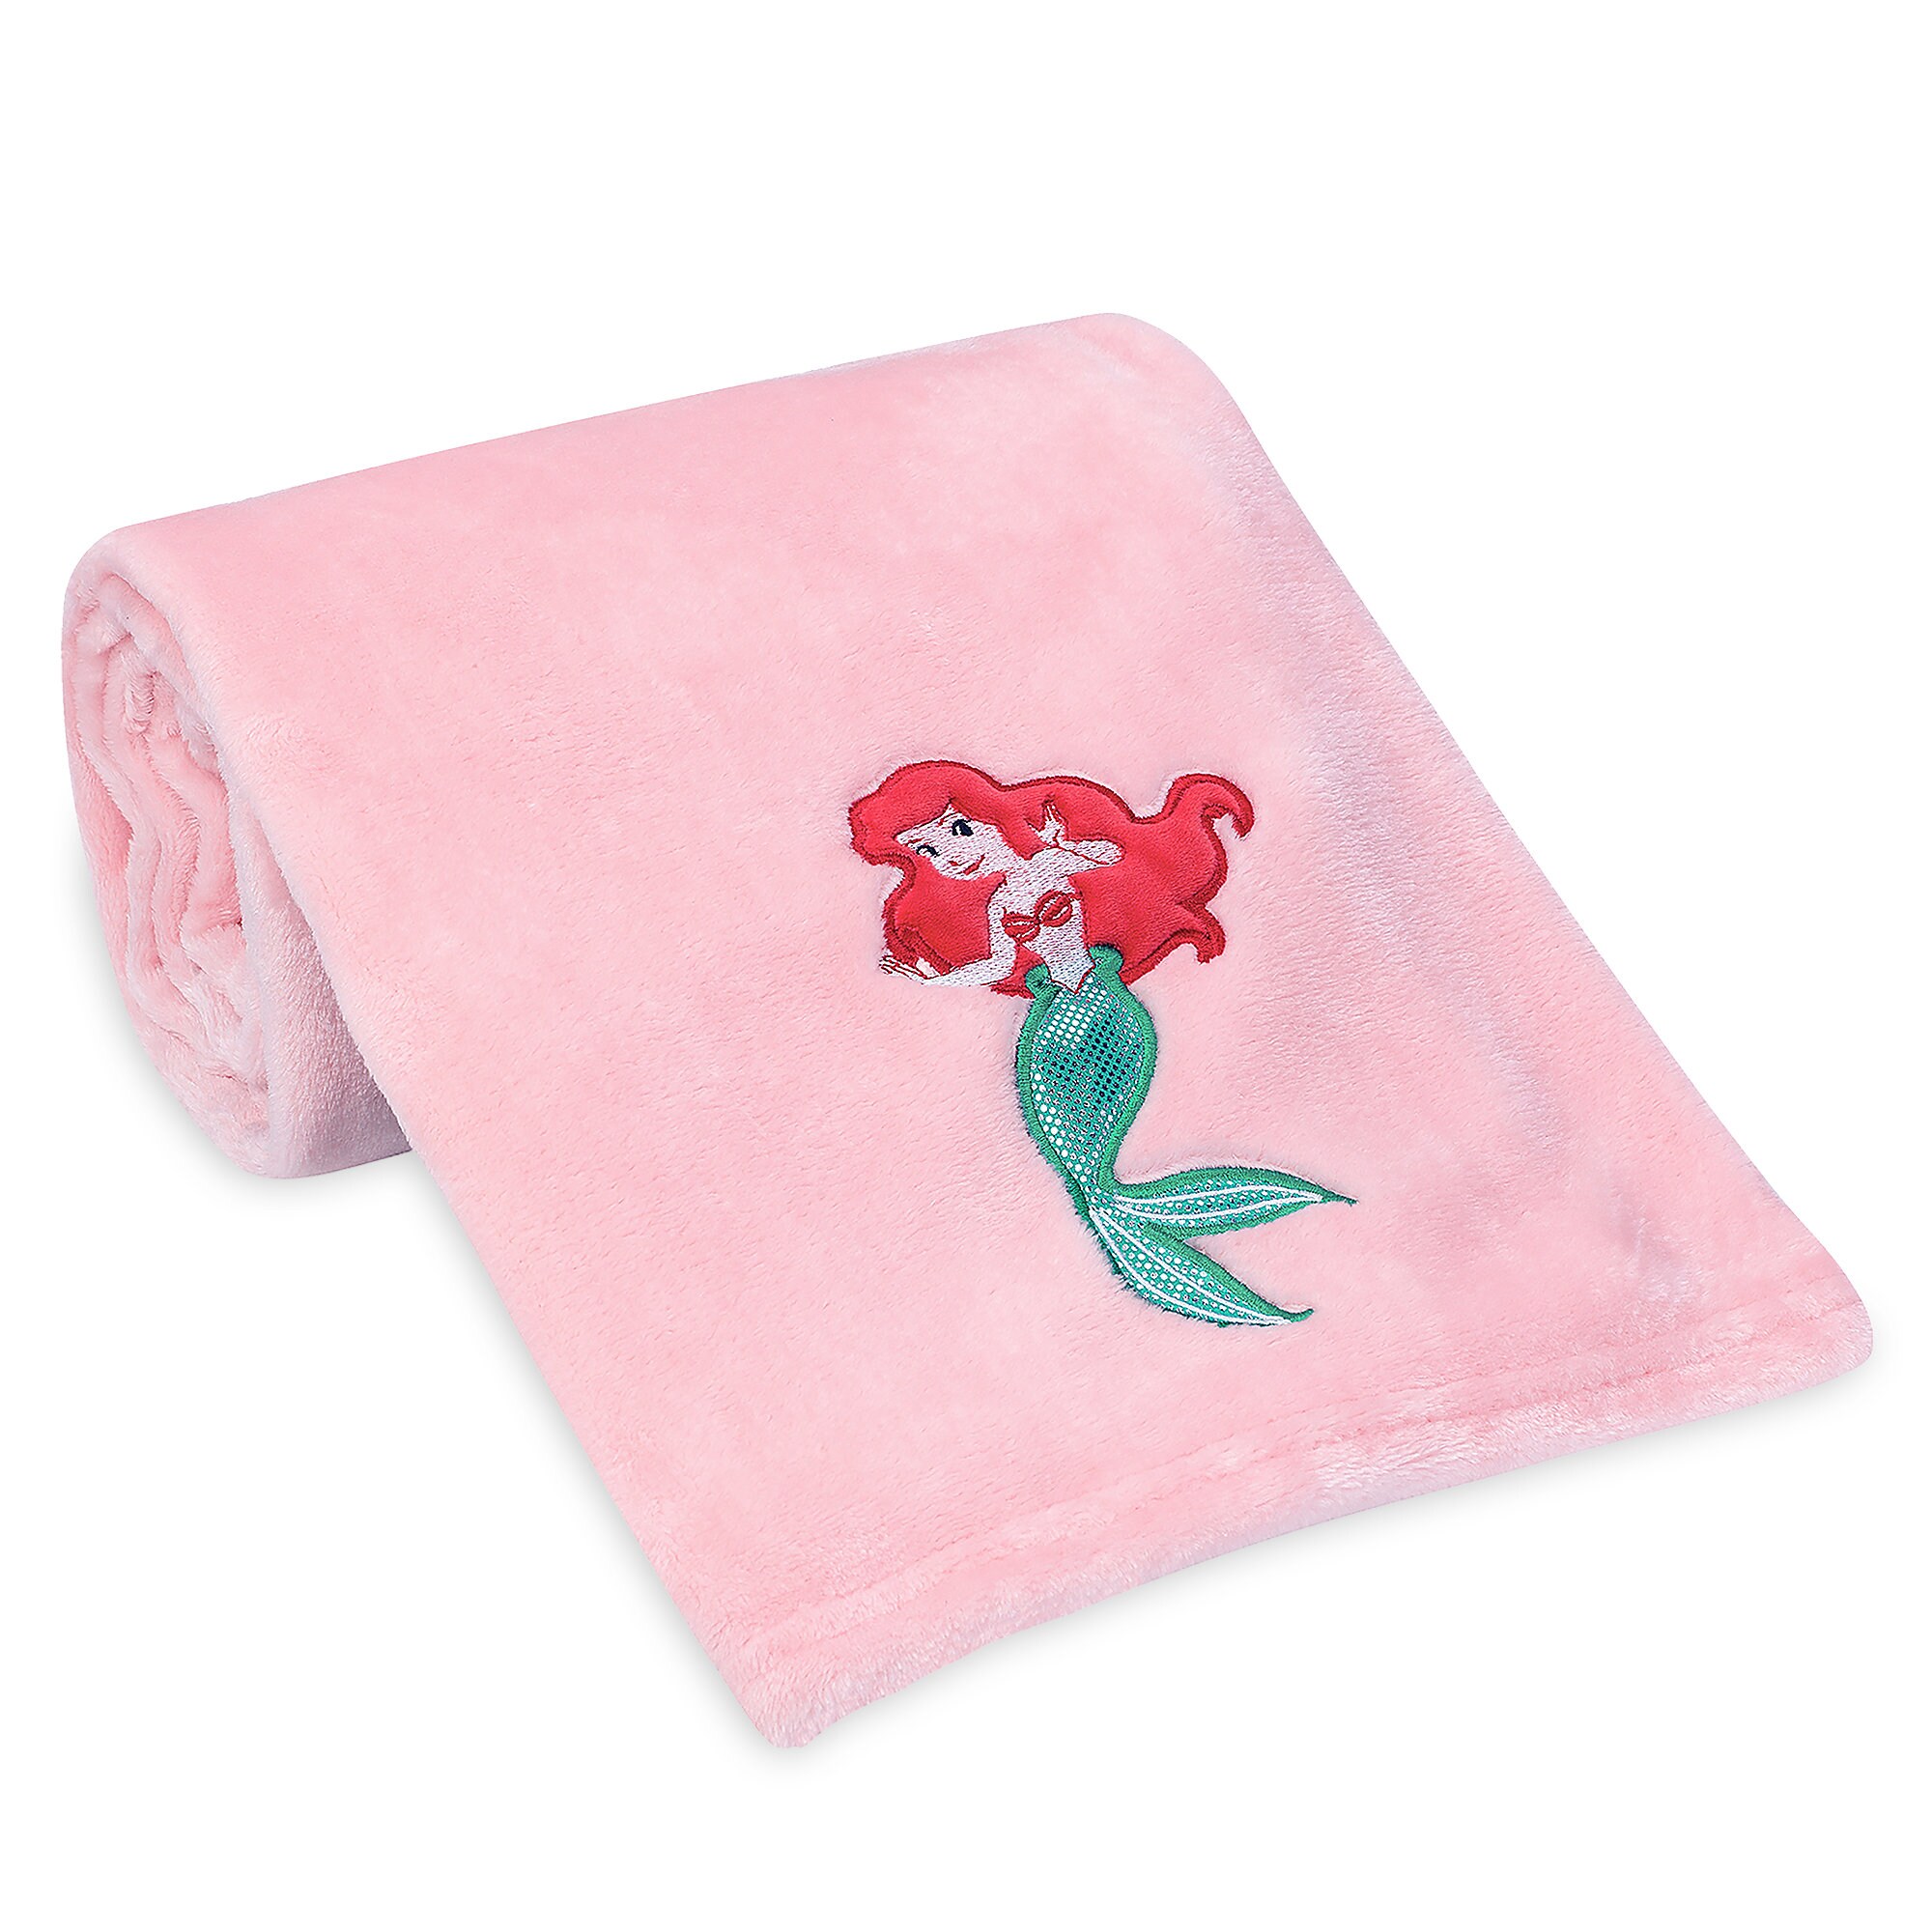 Ariel's Grotto Baby Blanket by Lambs & Ivy - The Little Mermaid